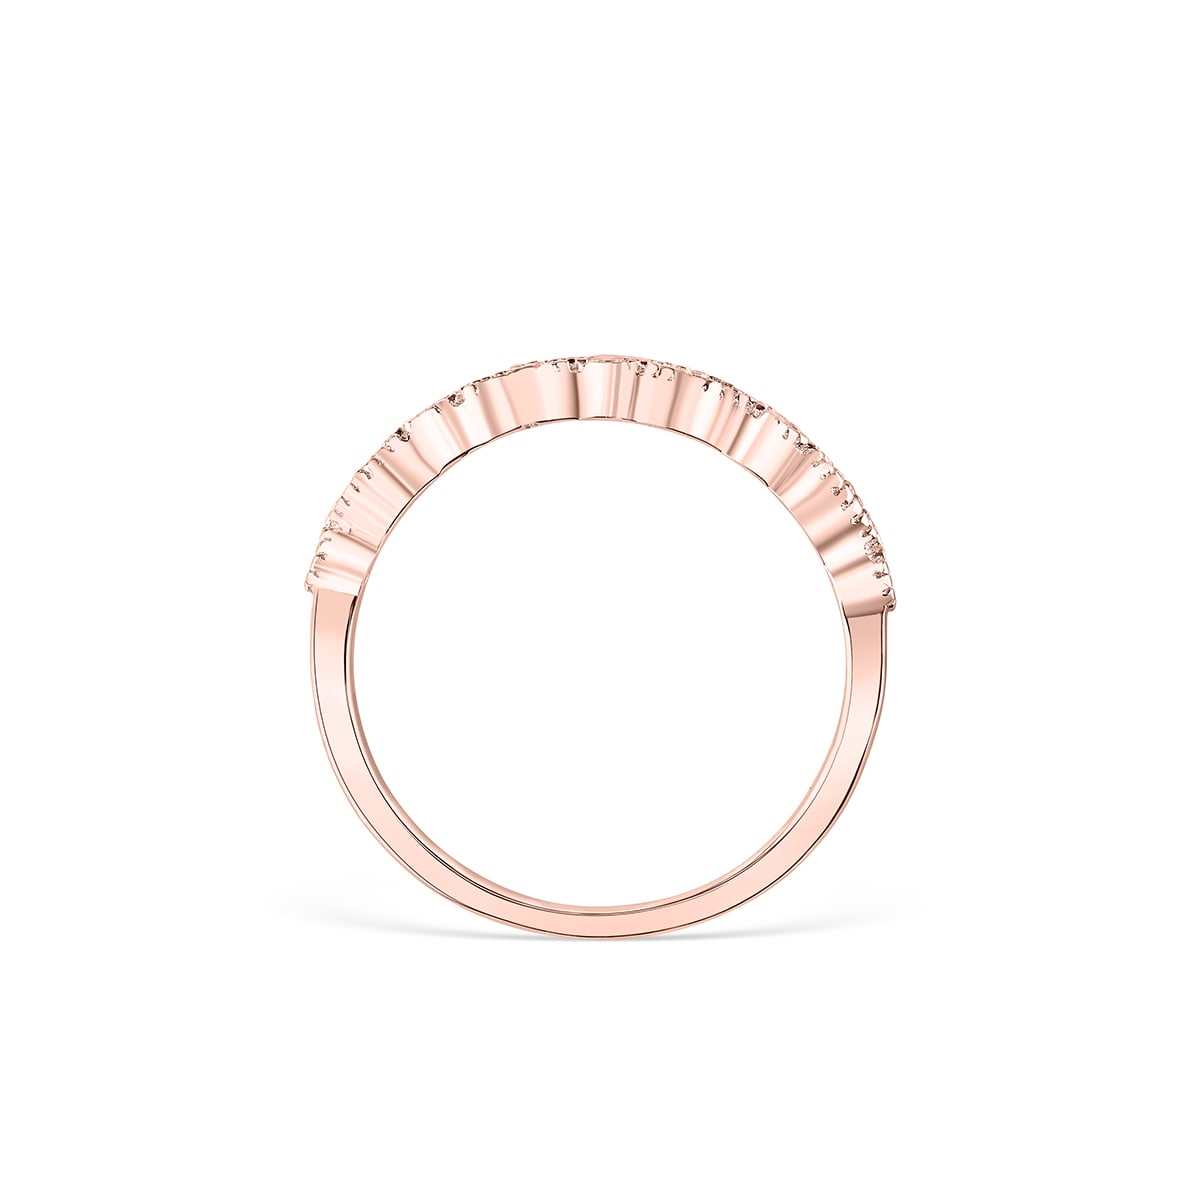 the forever rose gold wedding band setting